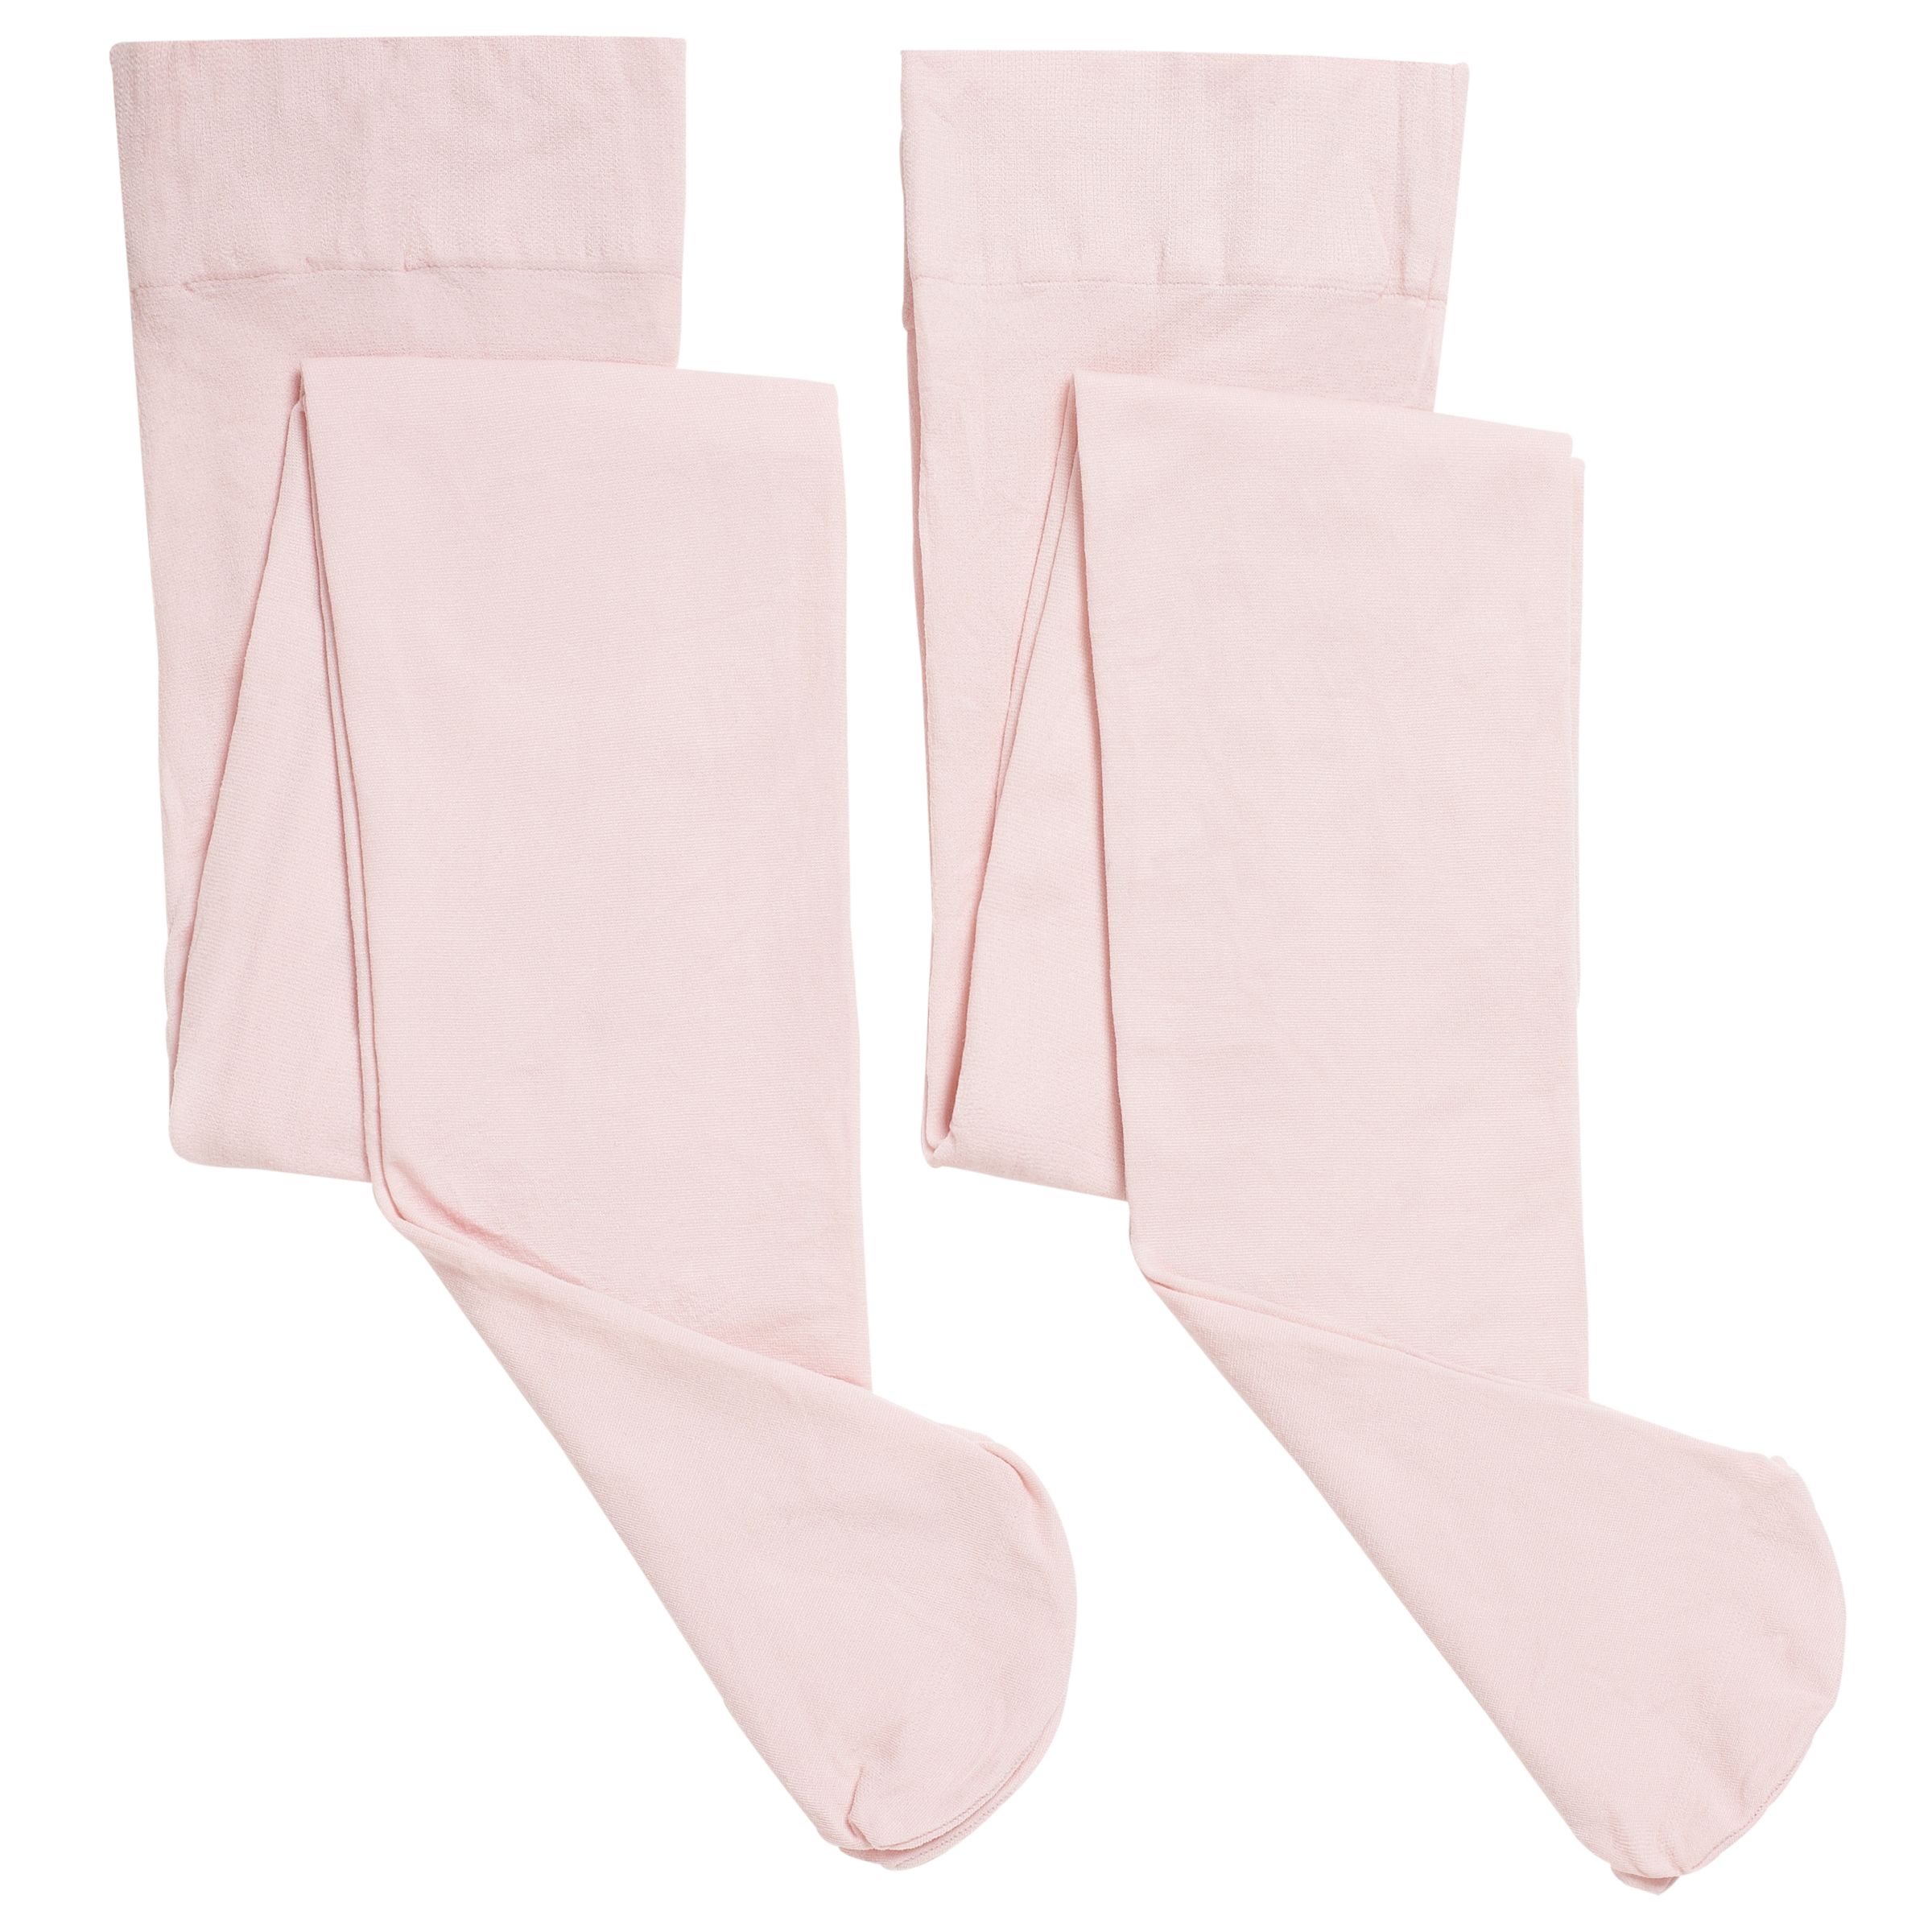 John Lewis ANYDAY Kids' Opaque Tights, Pack of 2, Pink, 9-10 Years